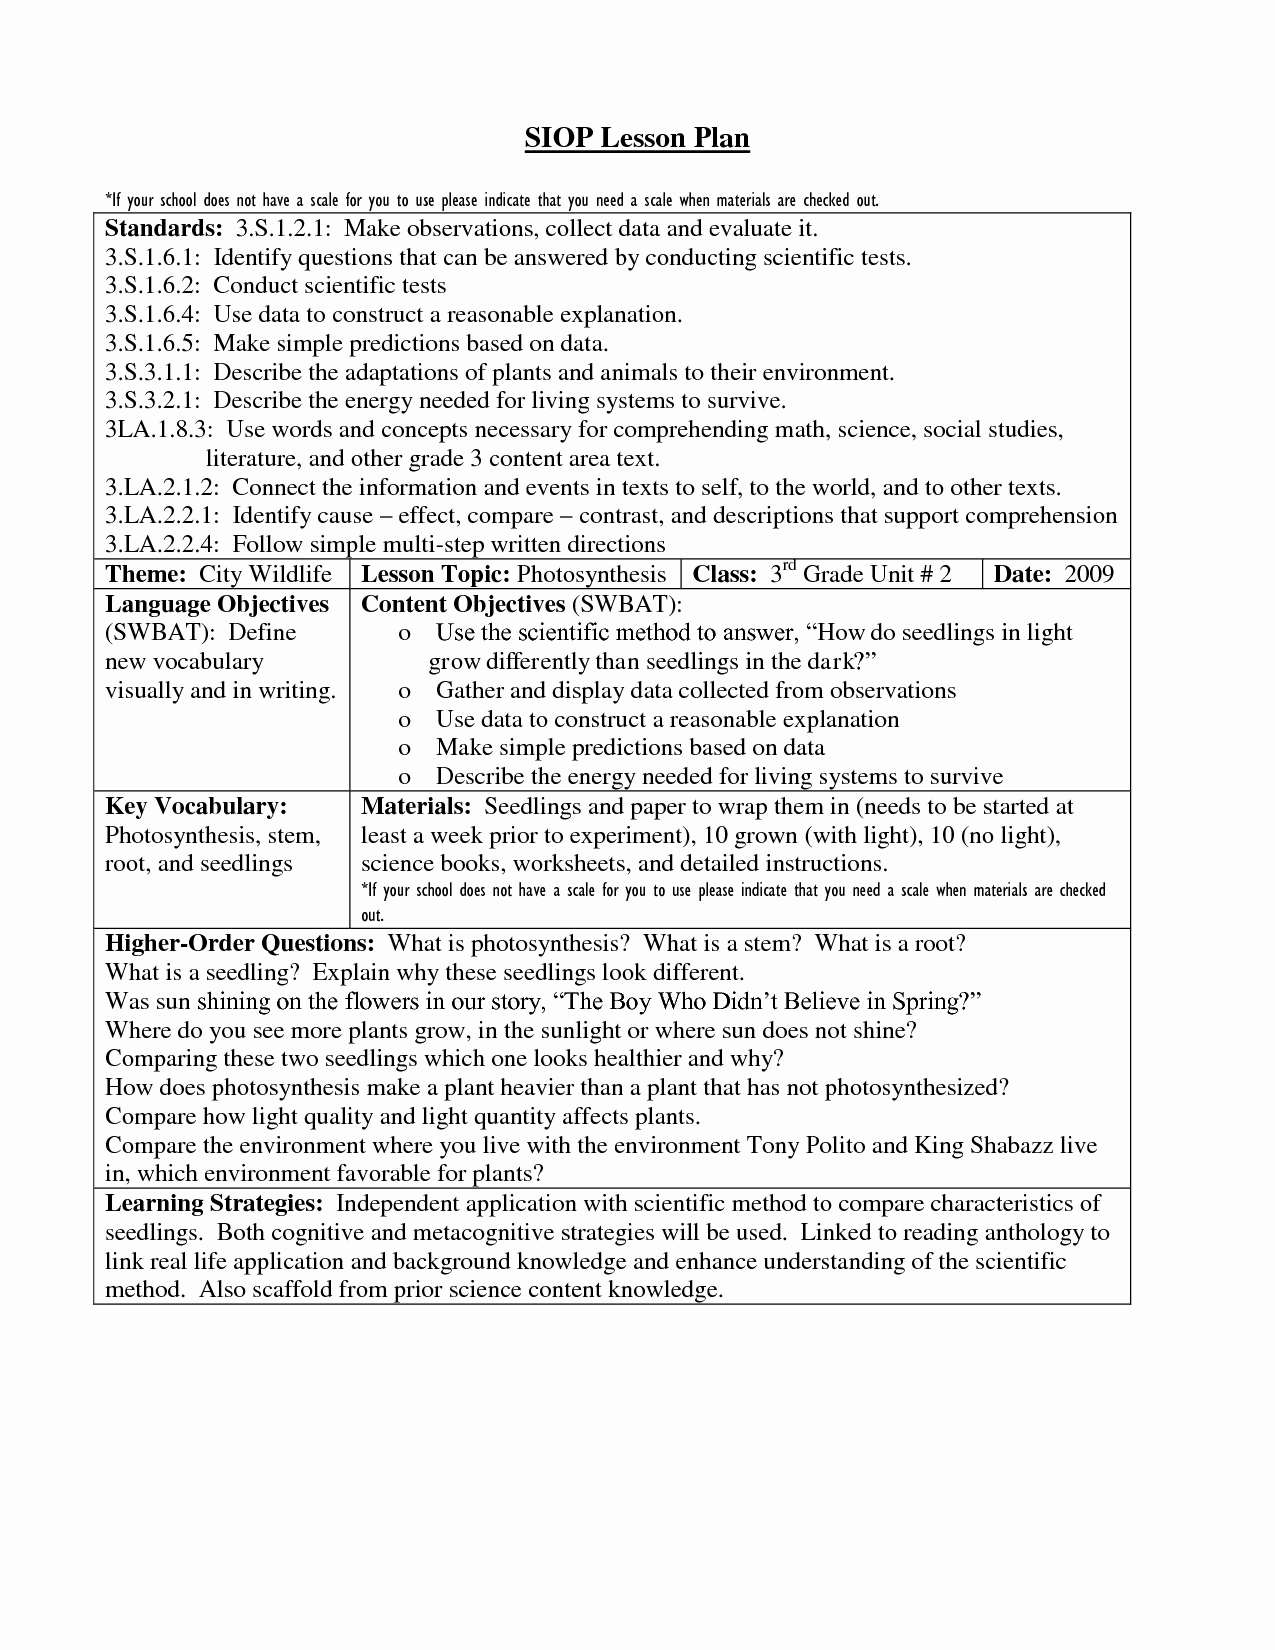 16 Awesome Siop Lesson Plan Template 2 Example